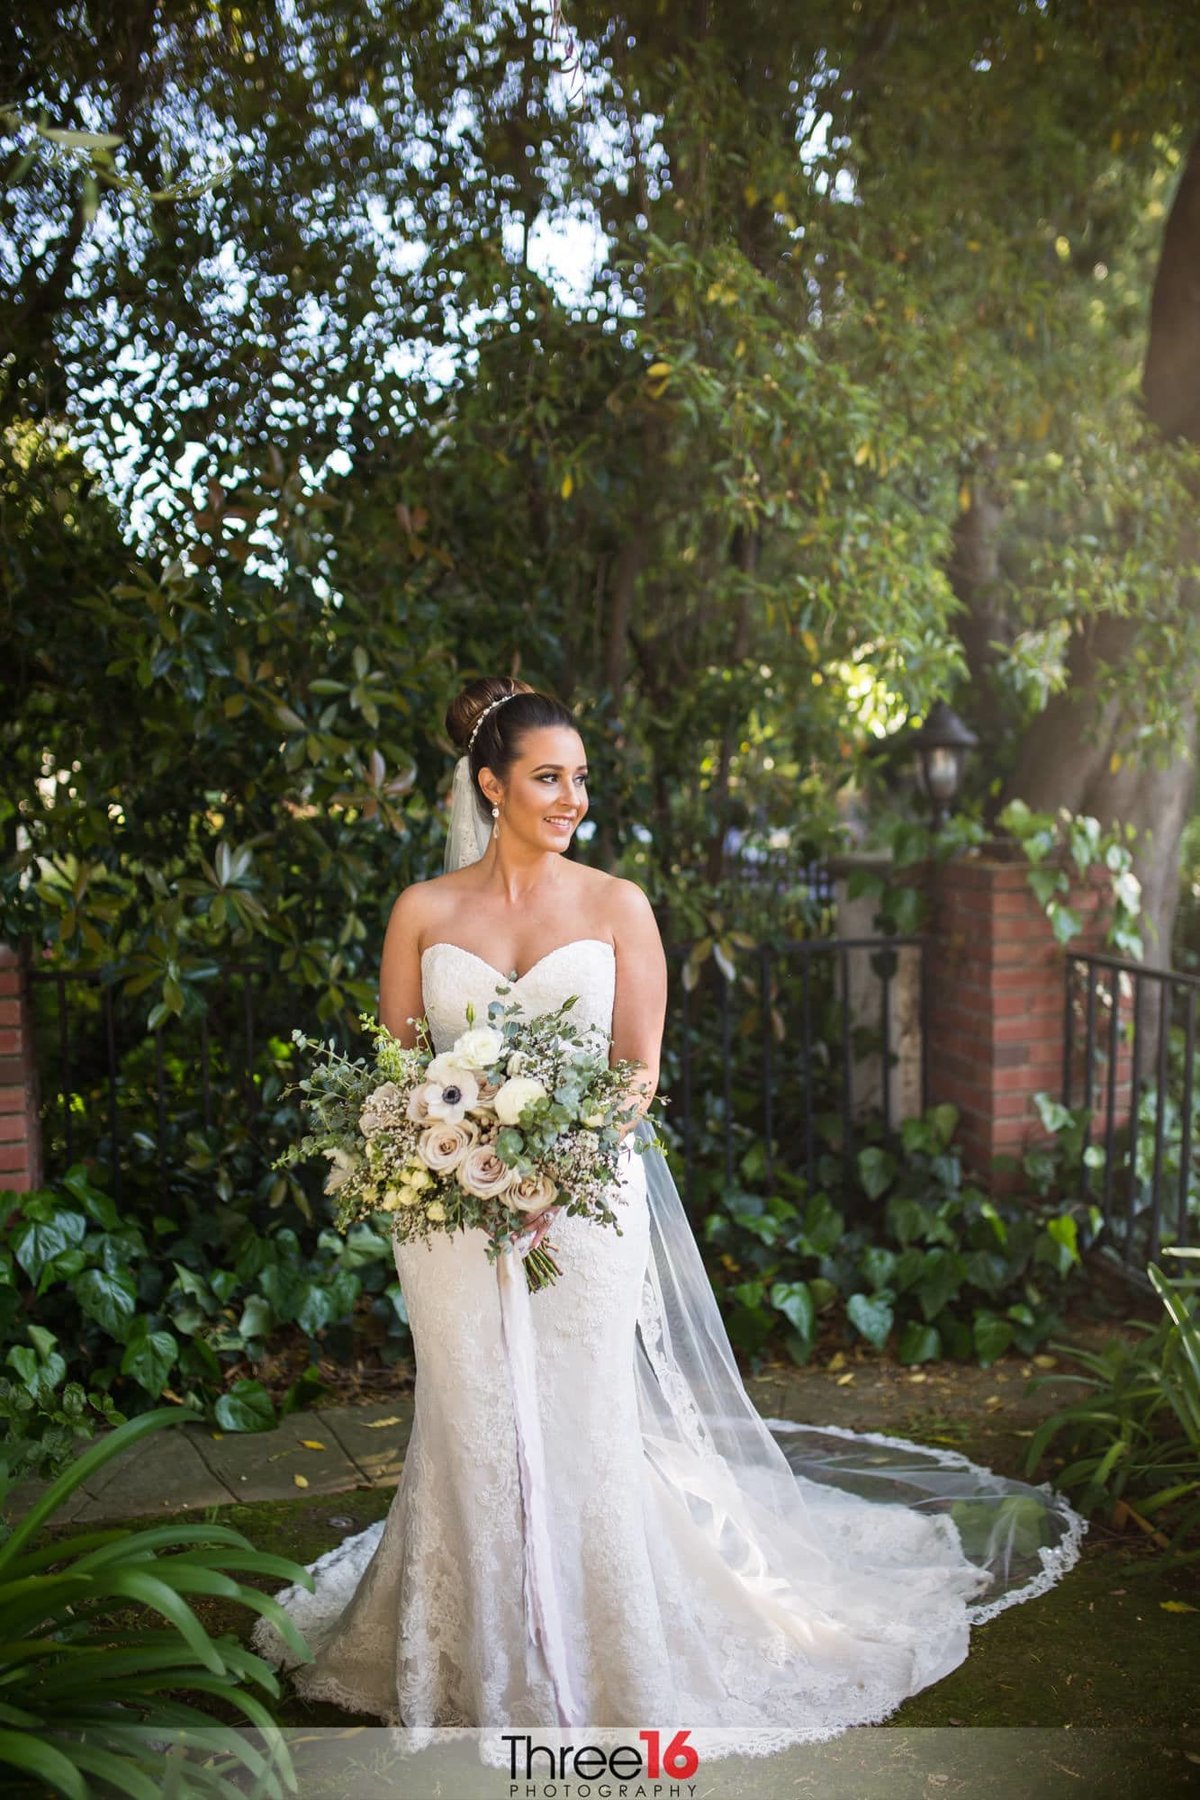 Bride poses for a photo holding her bouquet of flowers and her dress train fanned out amongst the green foliage